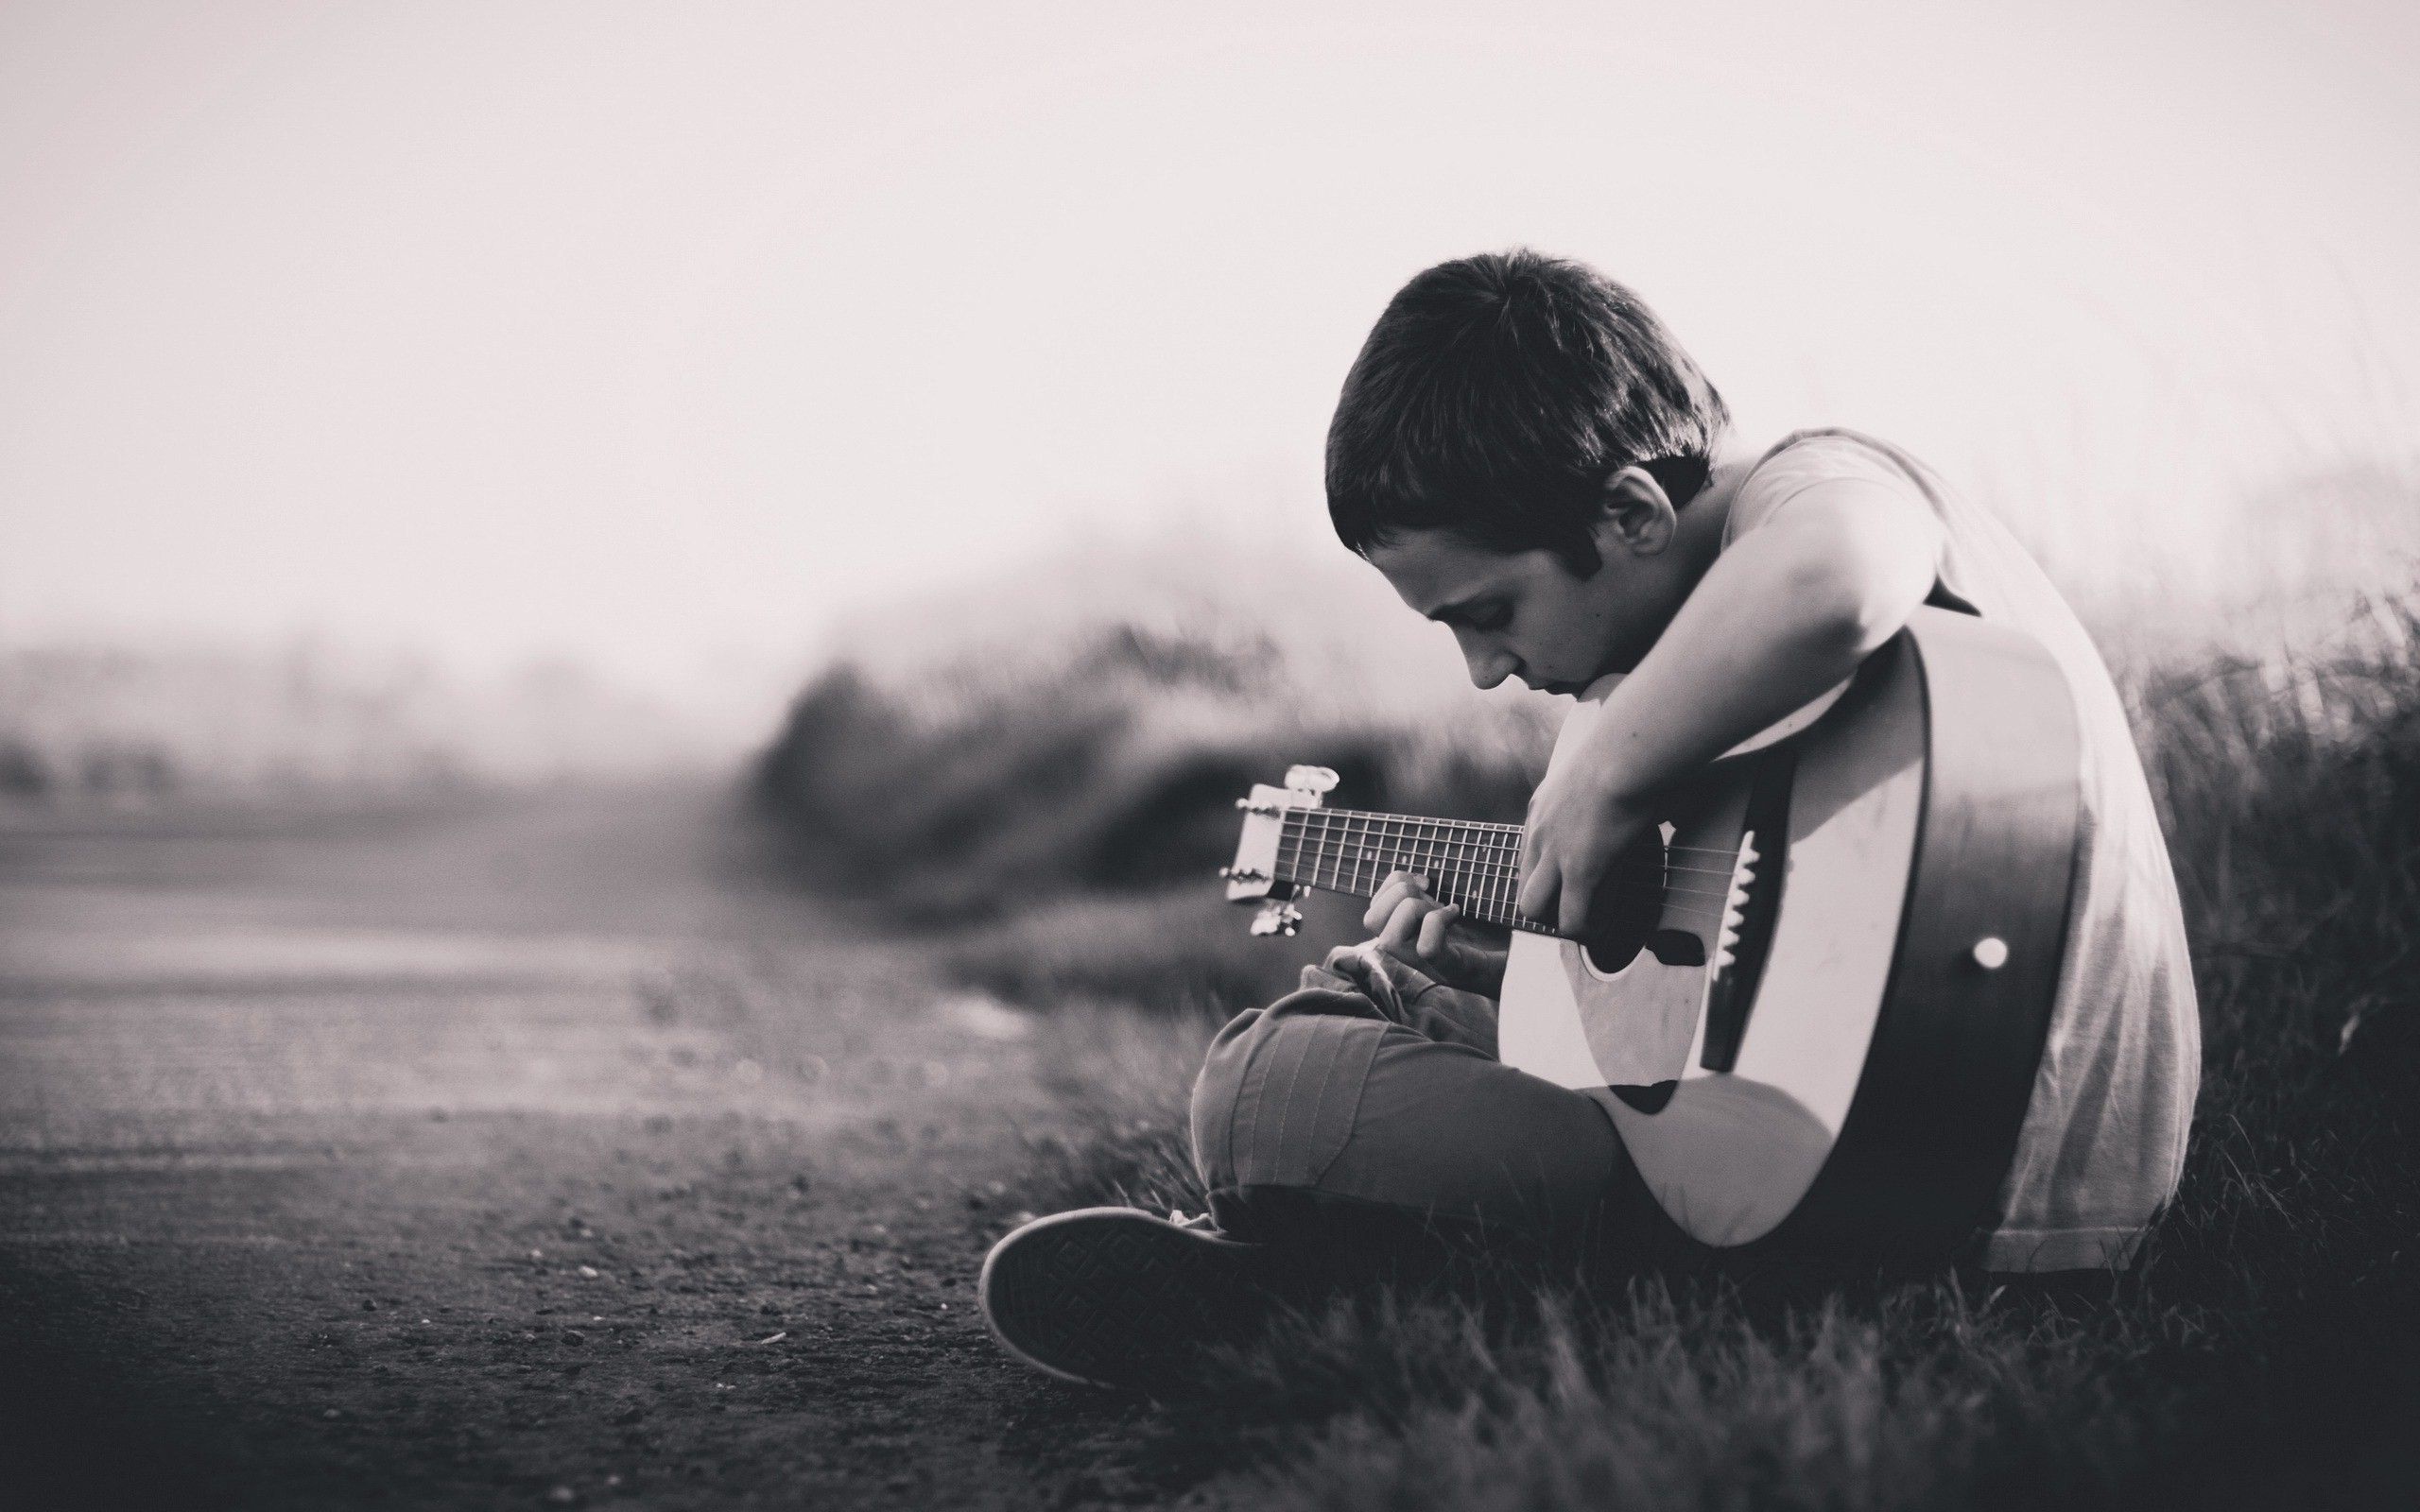 A boy playing guitar on the side of road - Guitar